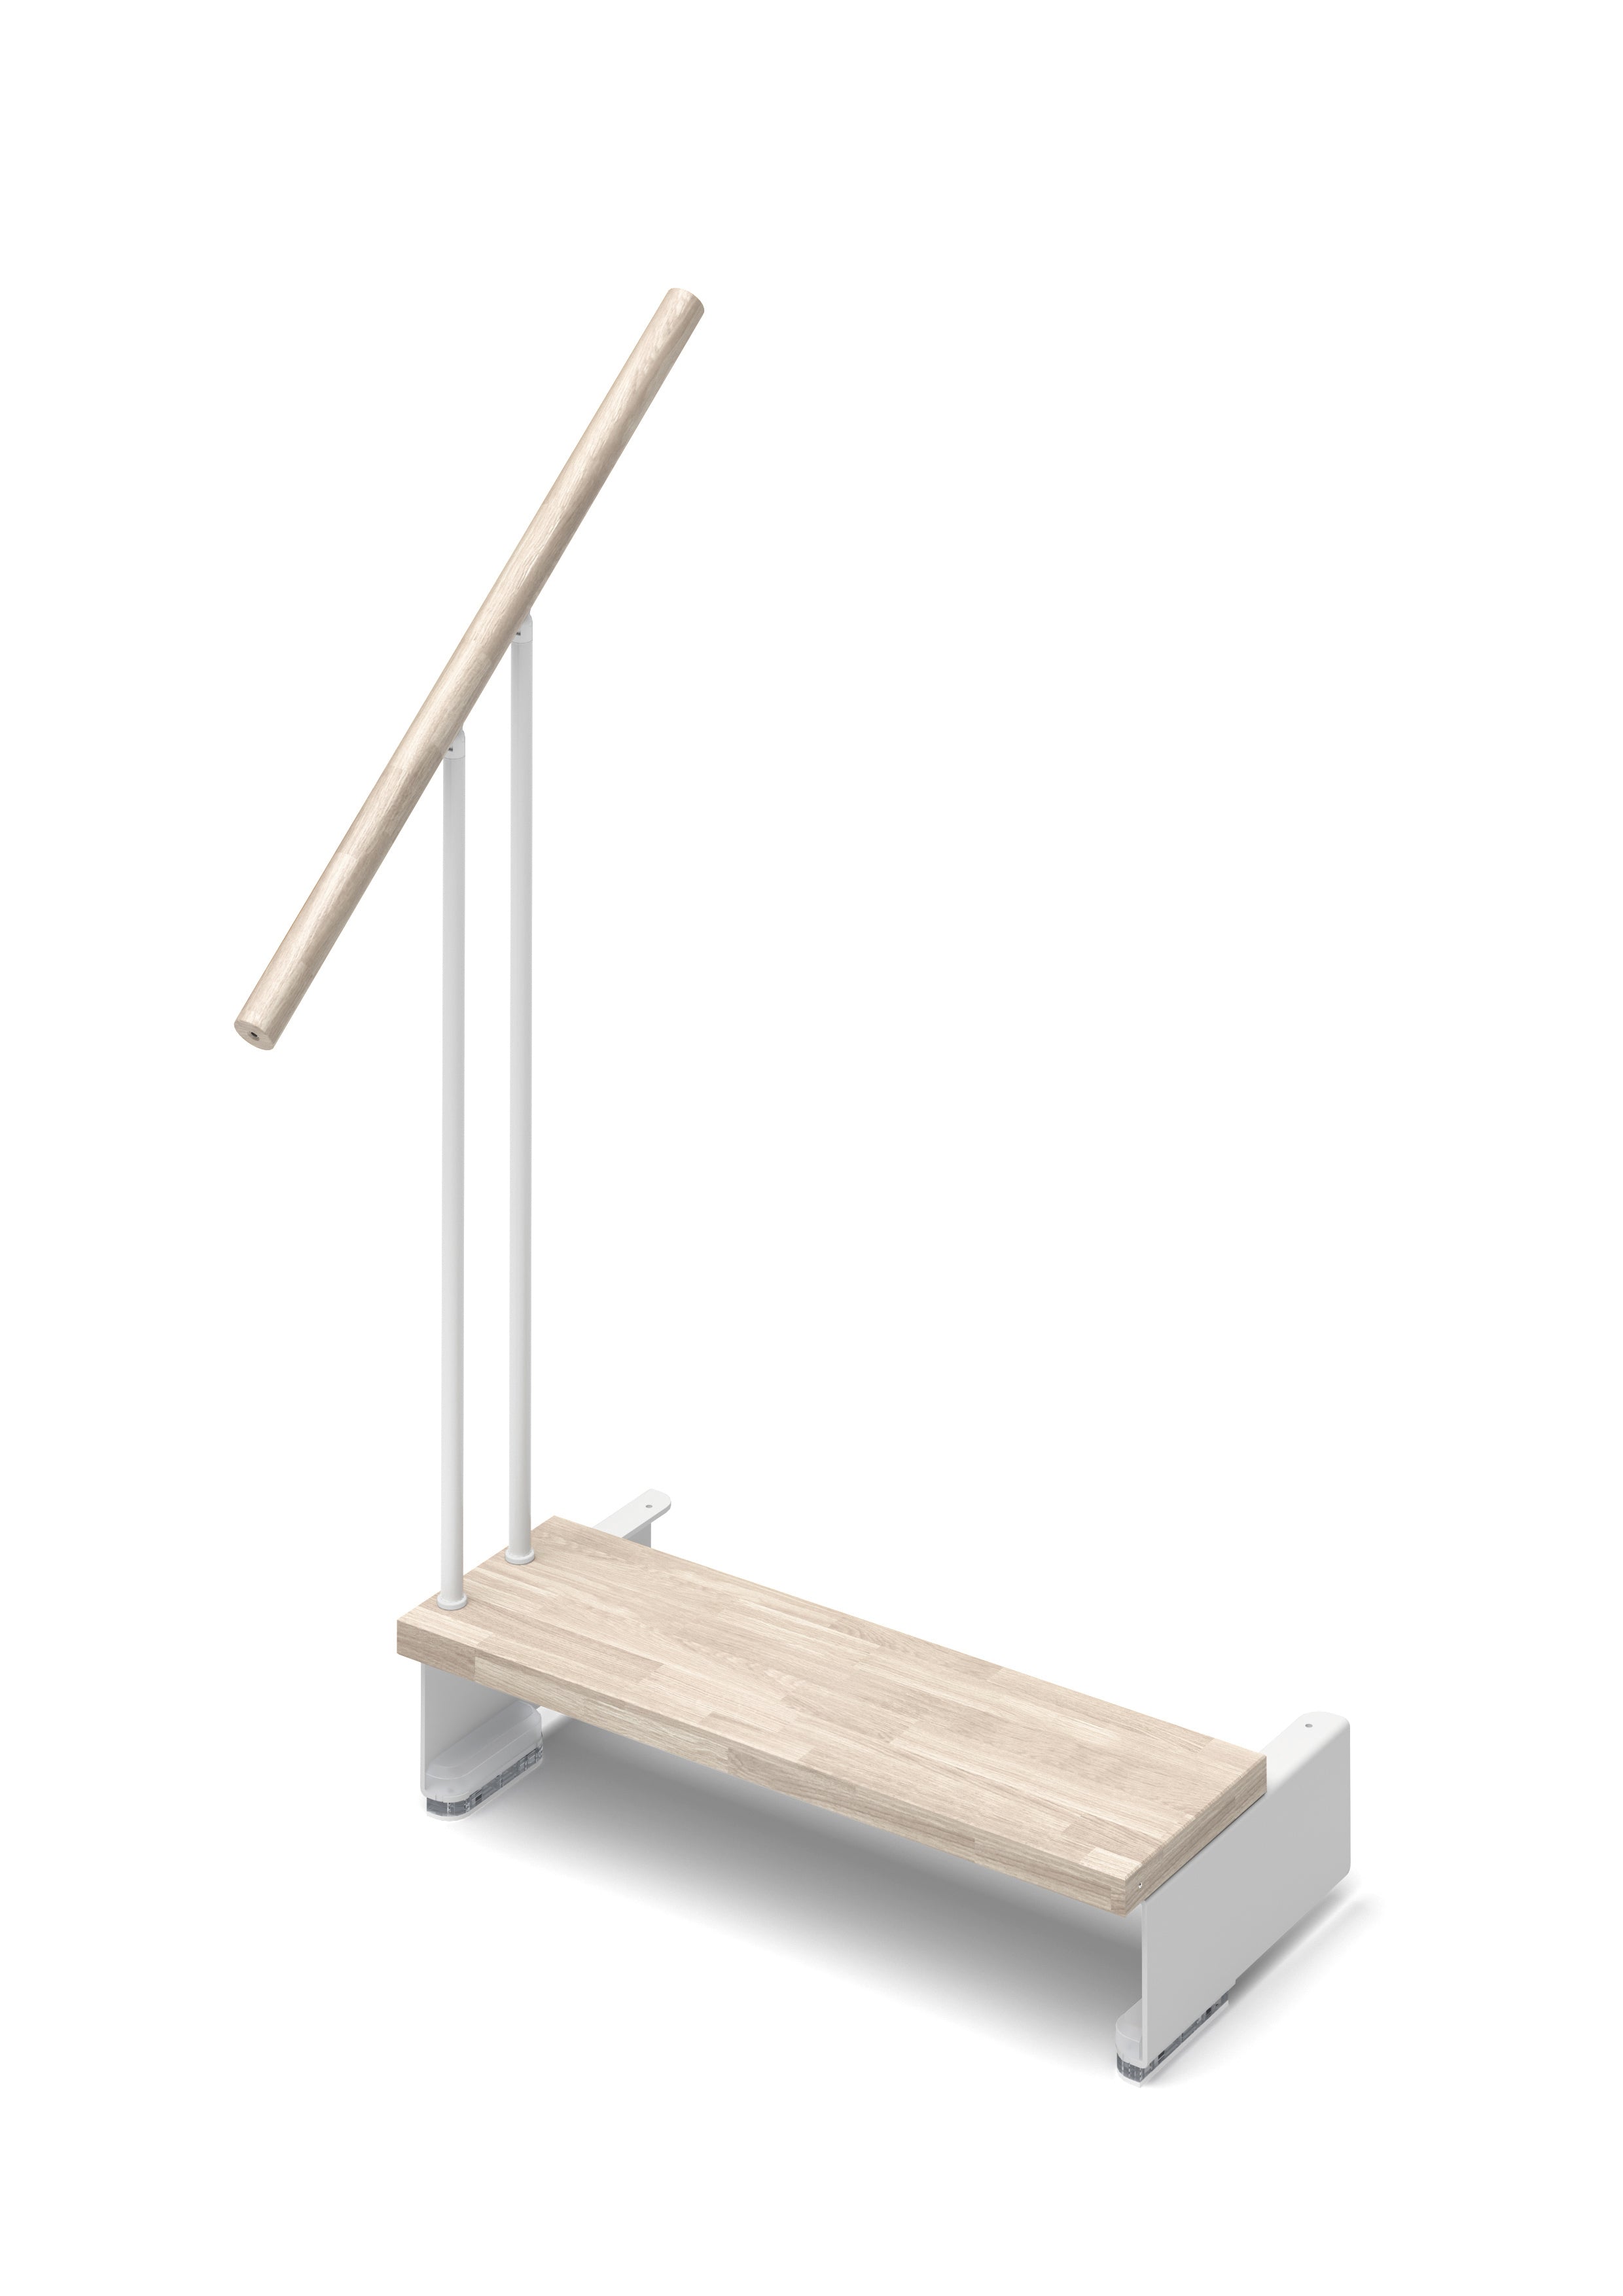 Additional step Adapta 94cm (with structure and railing) - Whitened 84